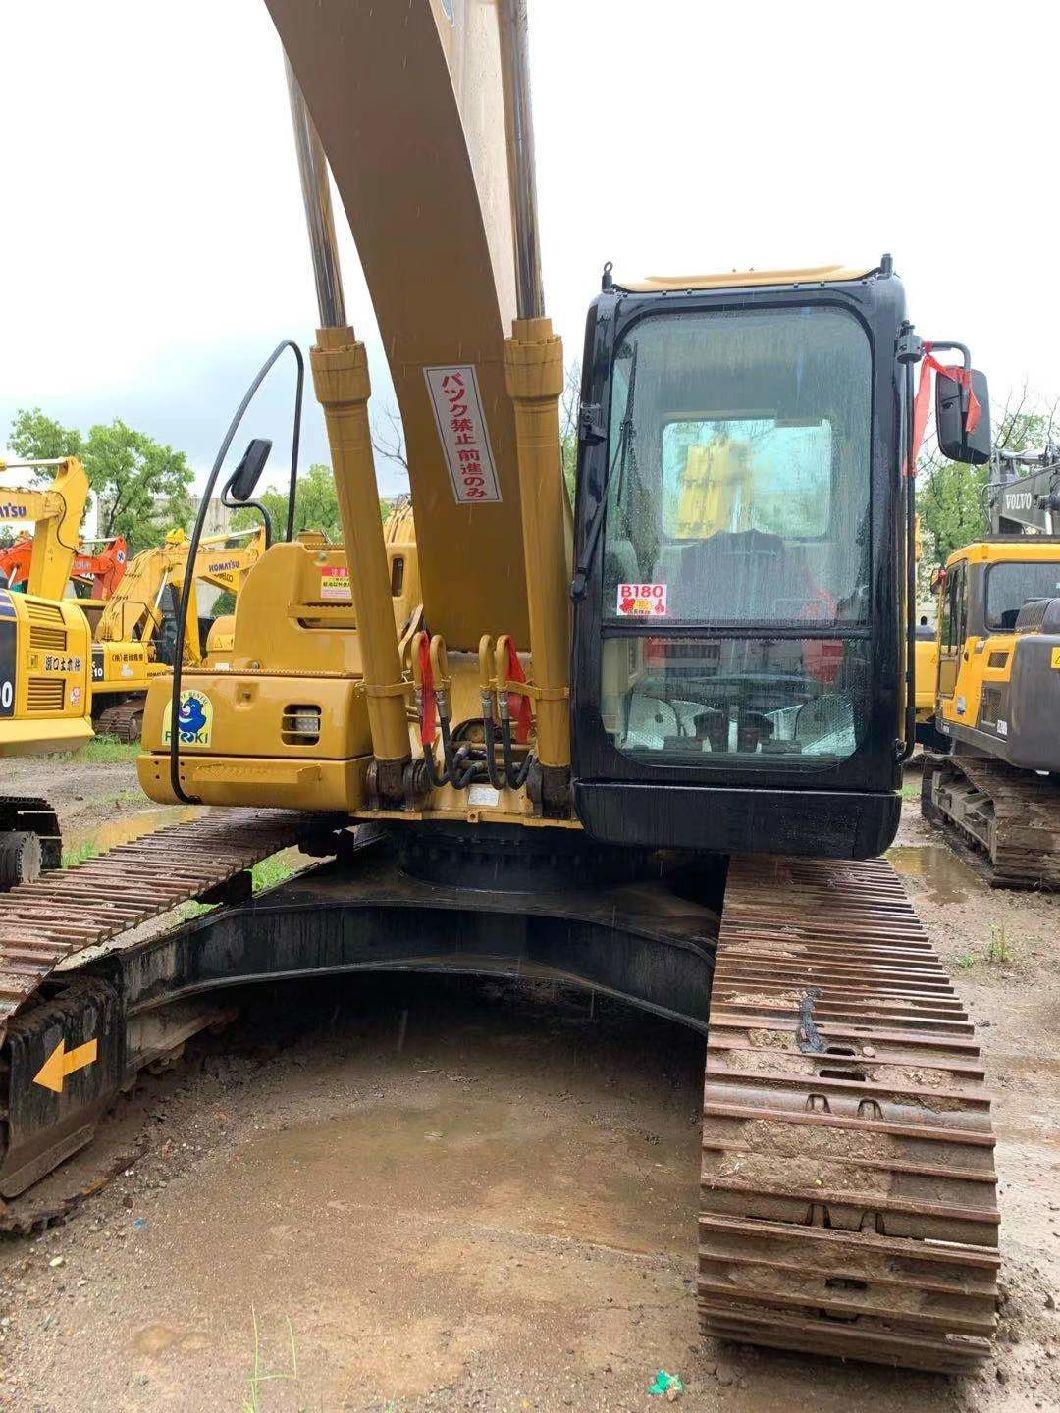 Used Cat 320d Crawler Excavator Is on Sale 330bl 330c 330d for Sale